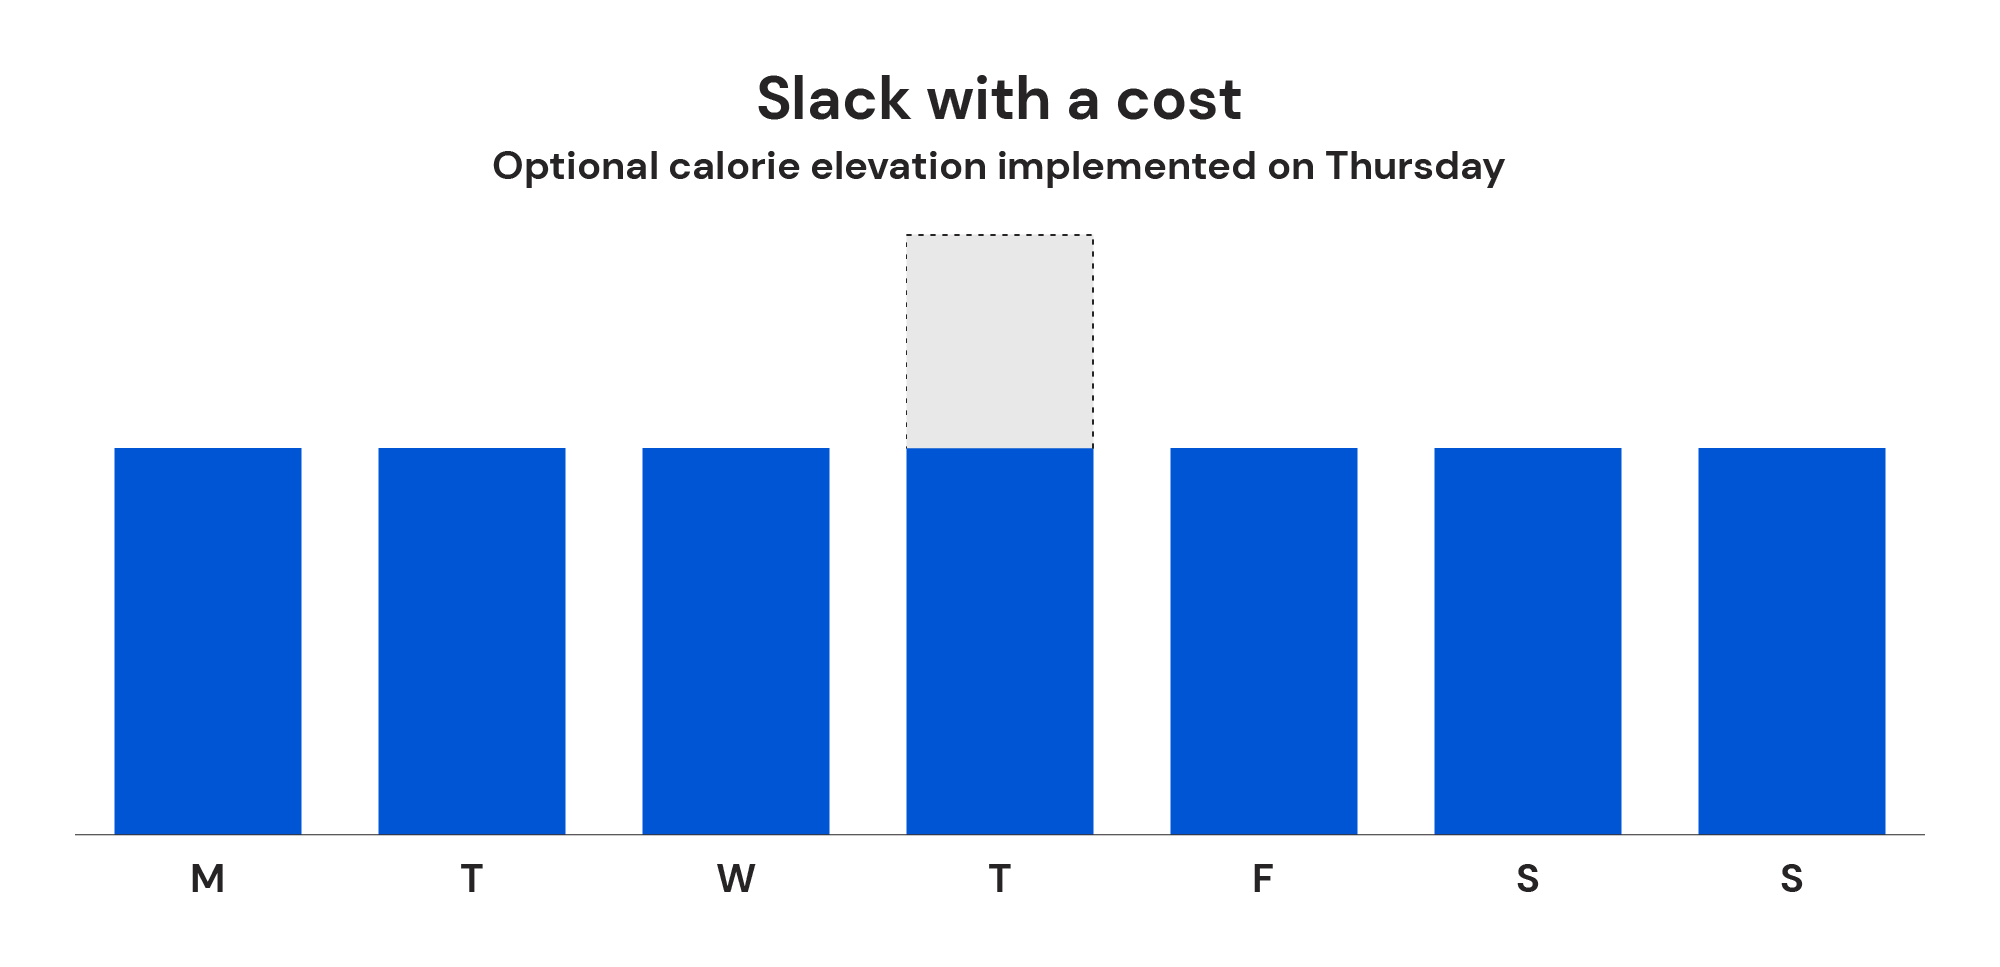 An example of “slack with a cost” implementation, in which the dieter consumes their entire calorie reserve on a Thursday.